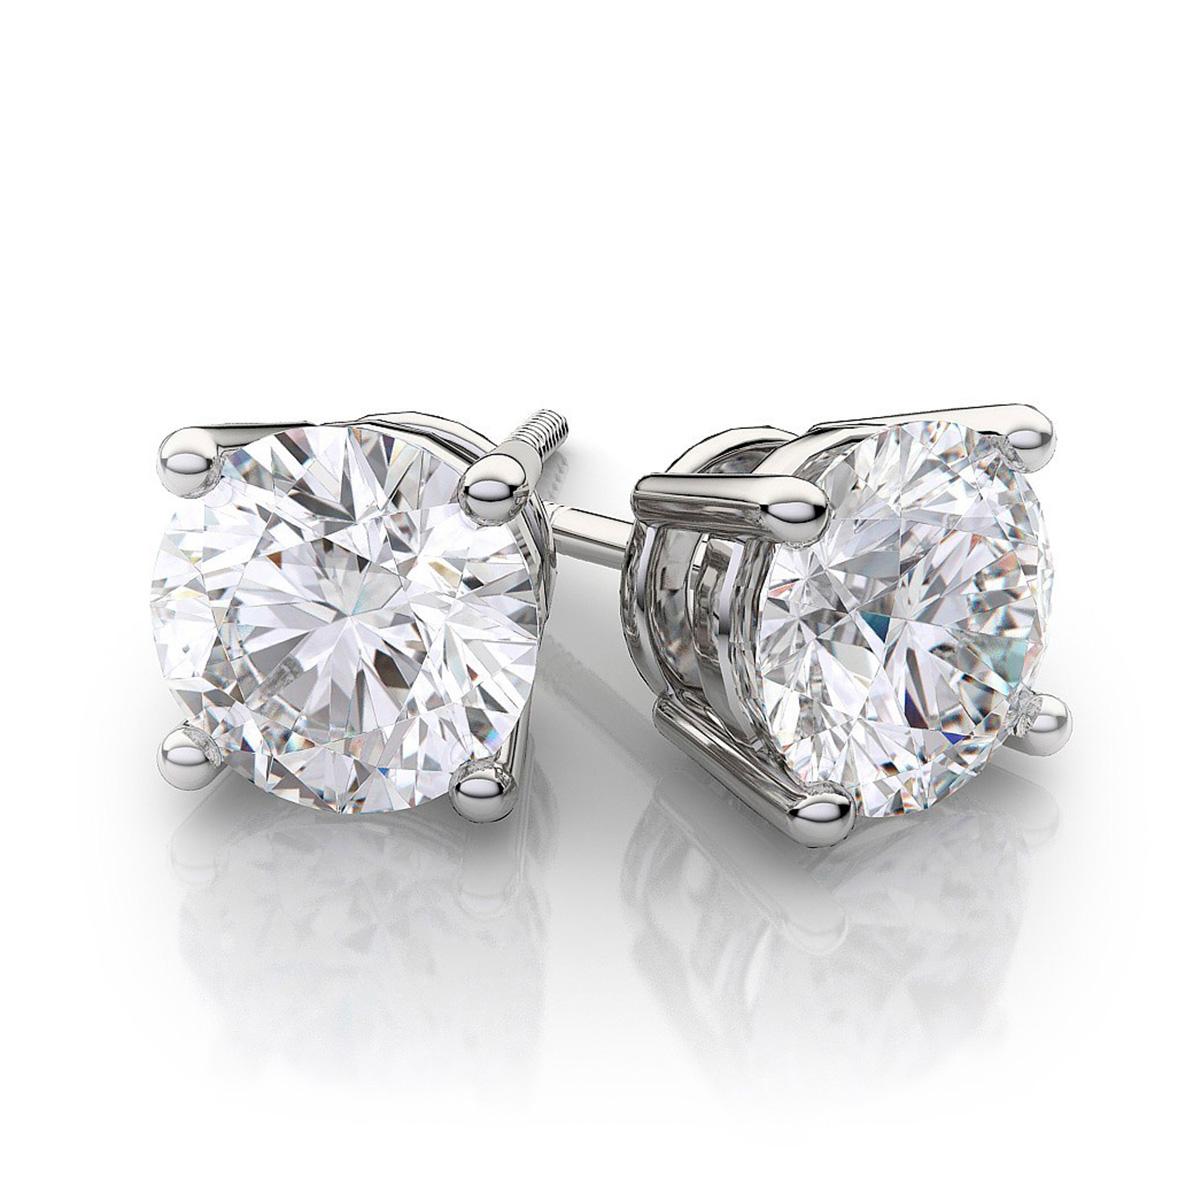 Diamond Solitaire Studs are a signature everyday piece of jewelry. They are a classic and a statement simultaneously. With measurements of 6.4 mm, these diamonds appear larger than most diamonds of similar size while maintaining their excellent fire